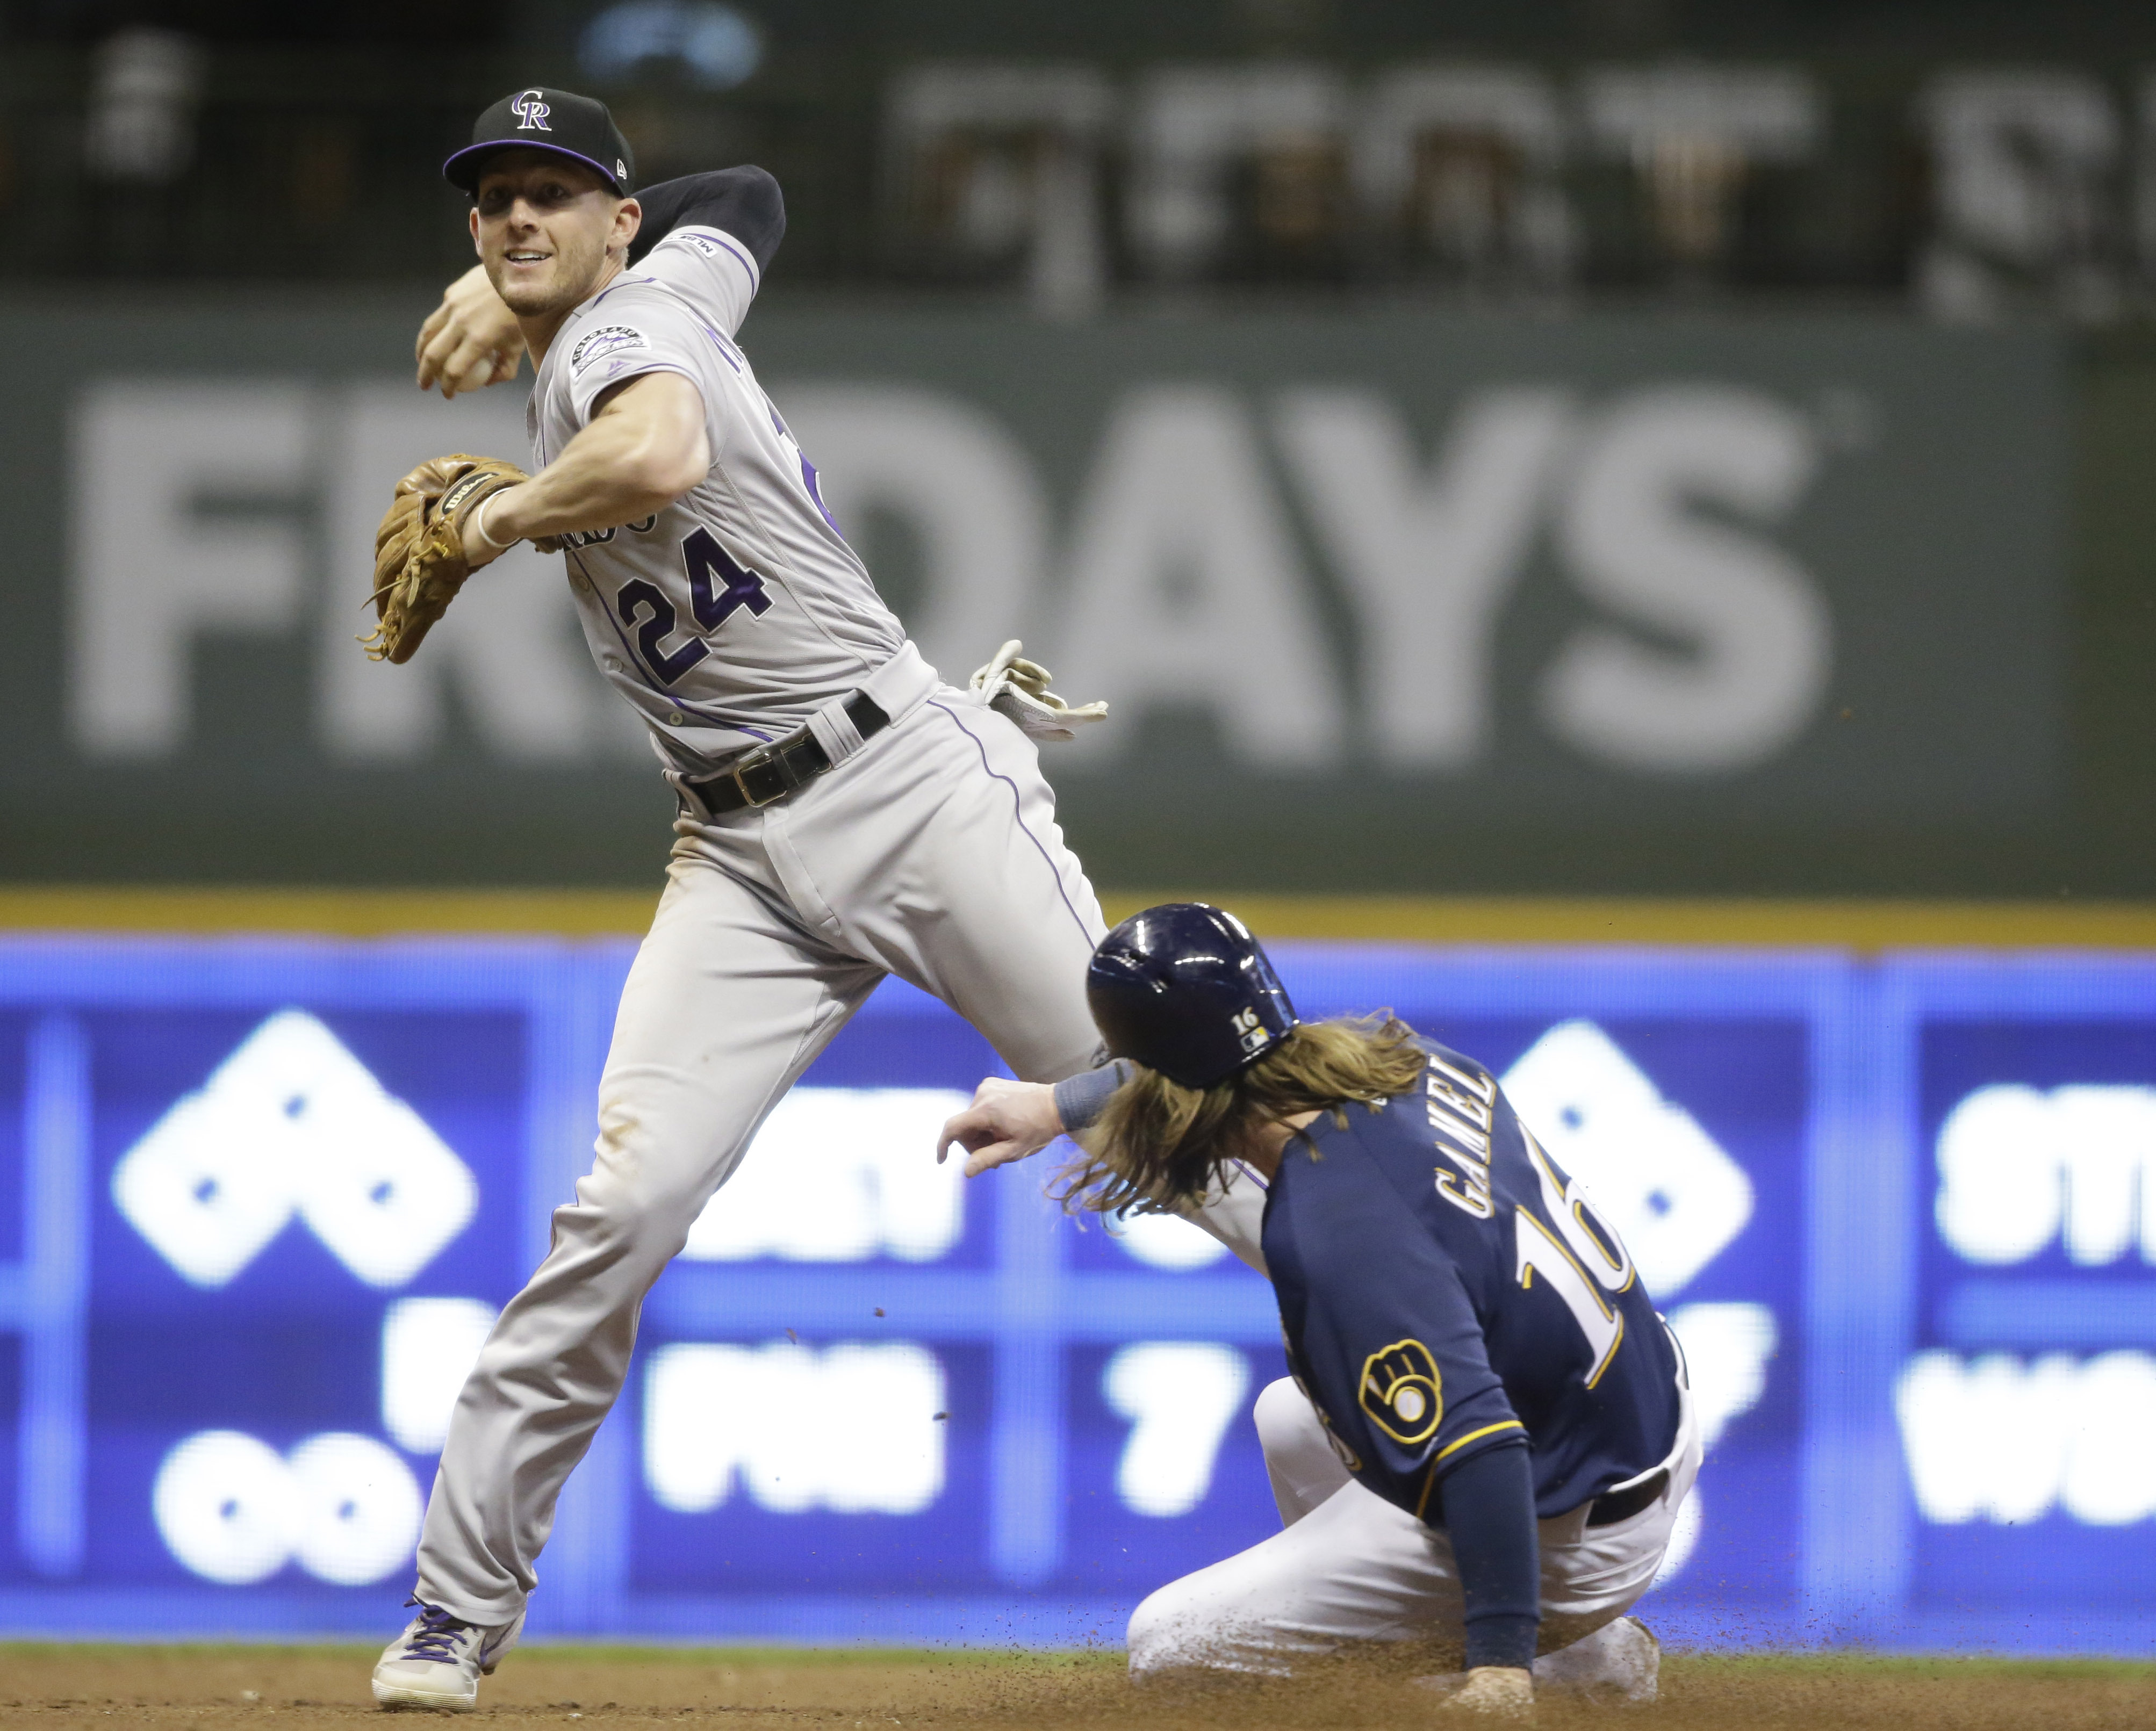 Arenado, Dahl, Tapia HRs lead Rockies over Brewers 11-6